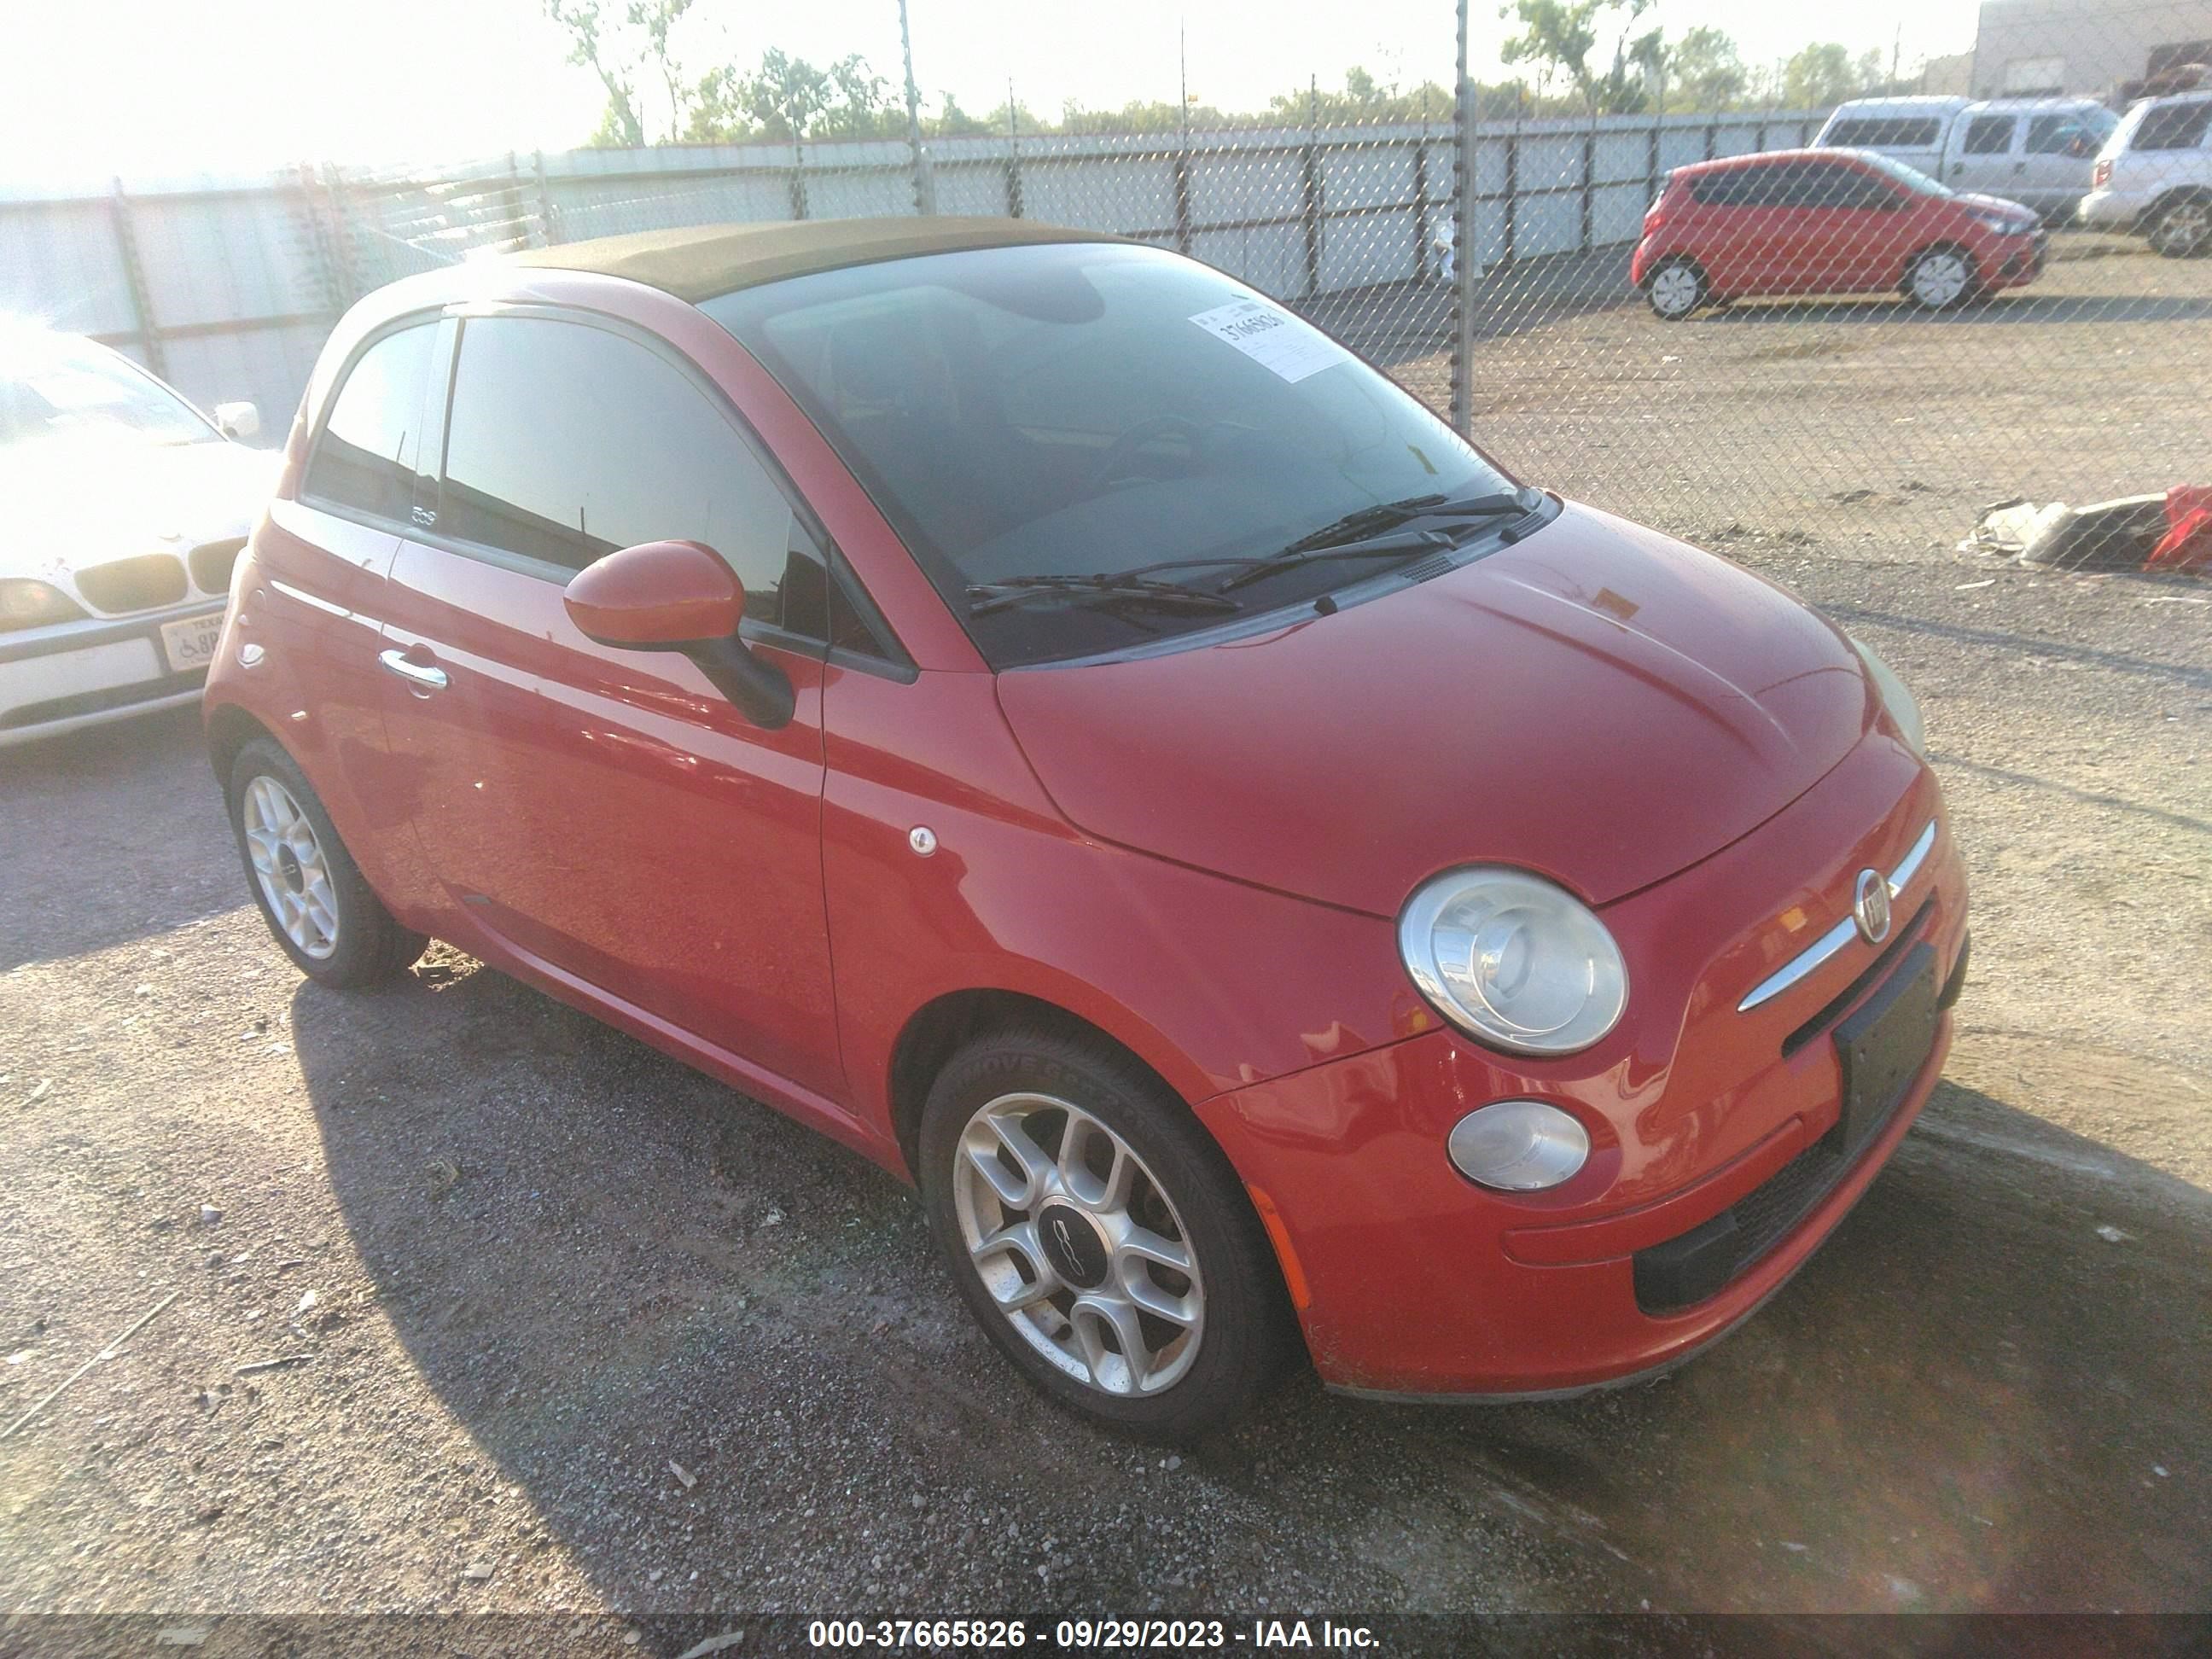 vin: 3C3CFFDR3DT743403 3C3CFFDR3DT743403 2013 fiat 500 1400 for Sale in 74107, 5311 W 46Th Street S, Tulsa, Oklahoma, USA